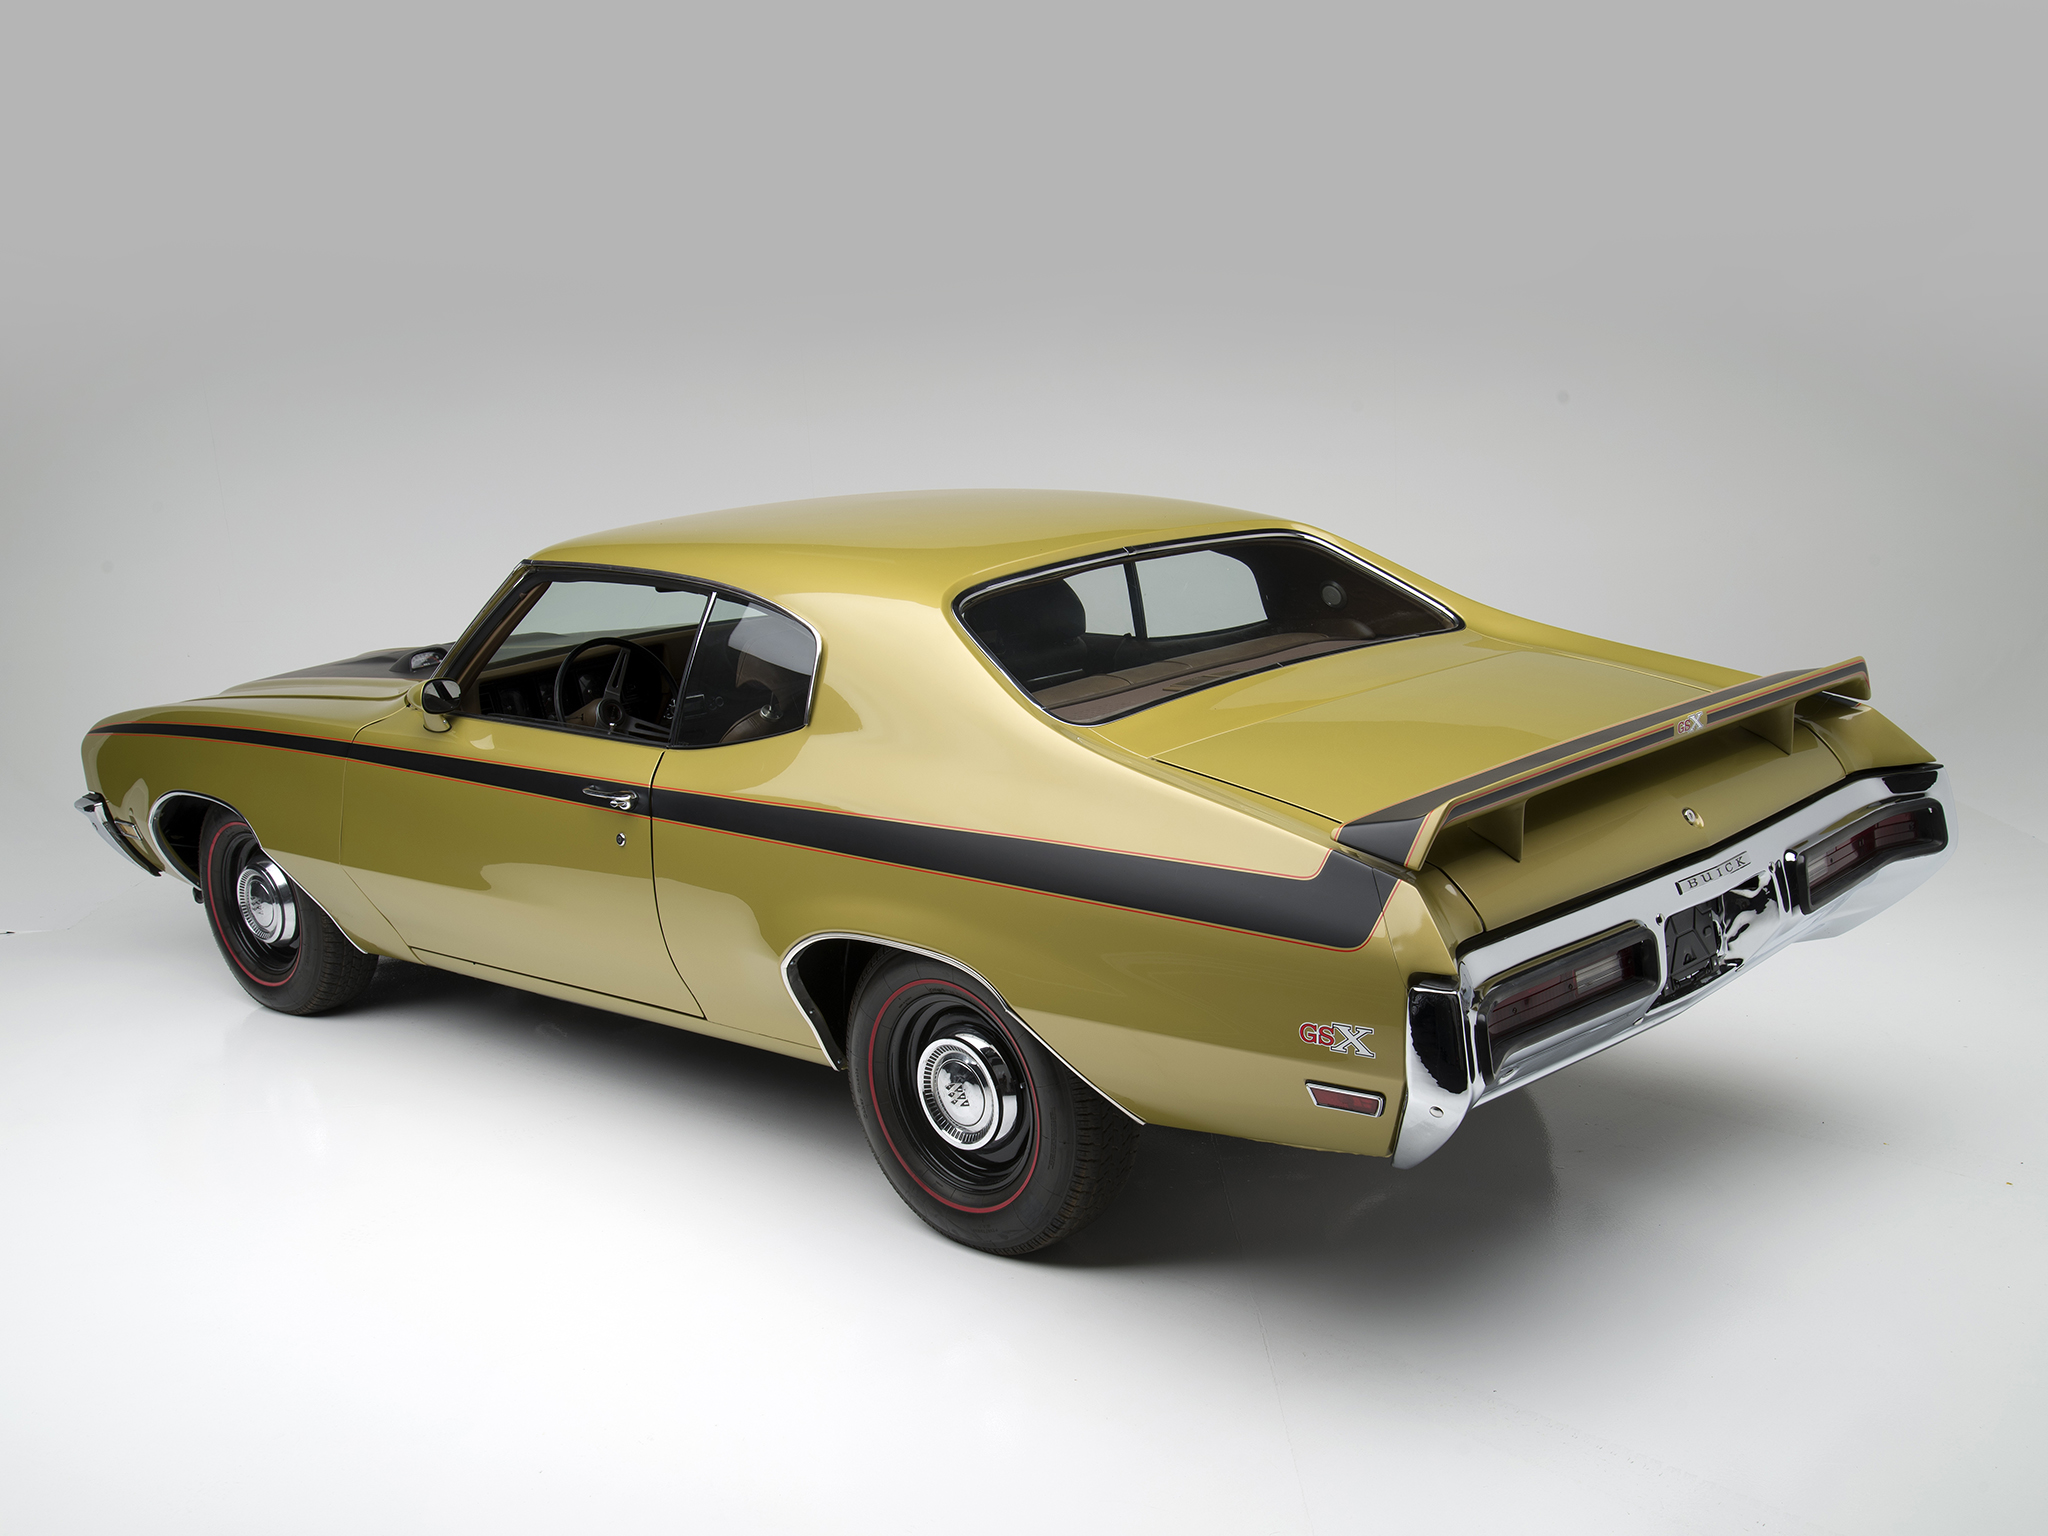 1971, Buick, Gsx, Muscle, Classic Wallpaper